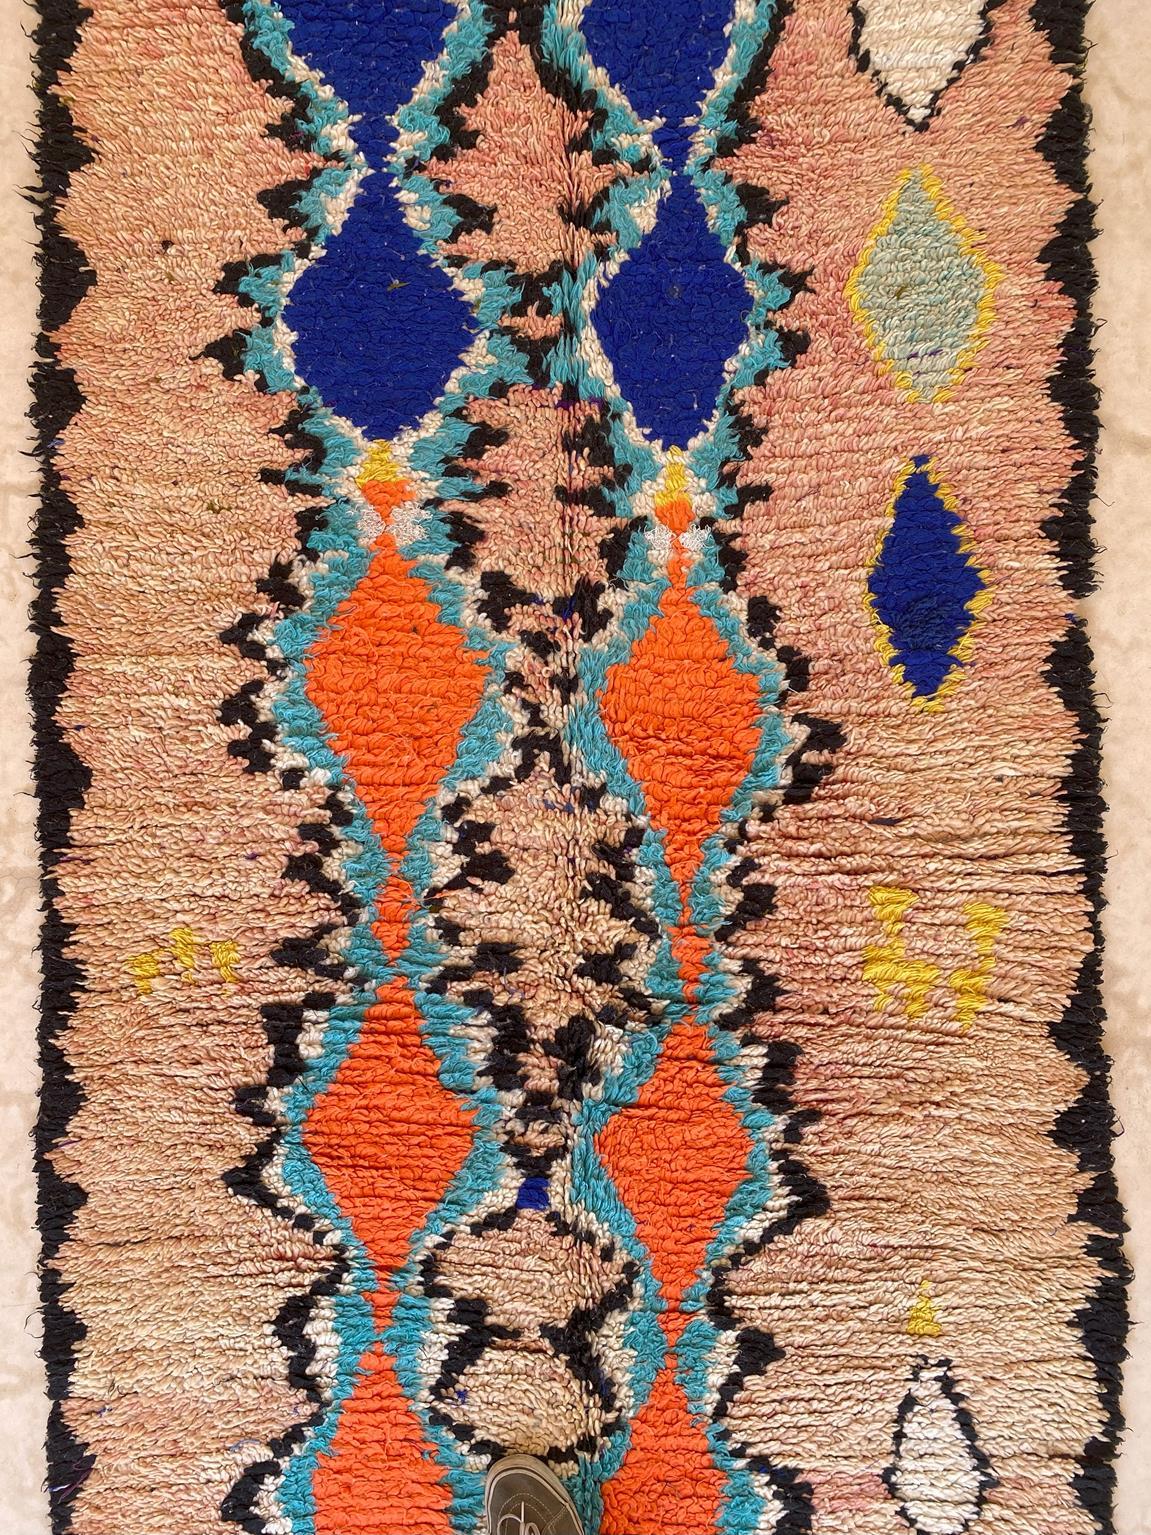 Vintage Moroccan Azilal rug - Salmon/blue - 4.3x9.6feet / 132x295cm For Sale 1